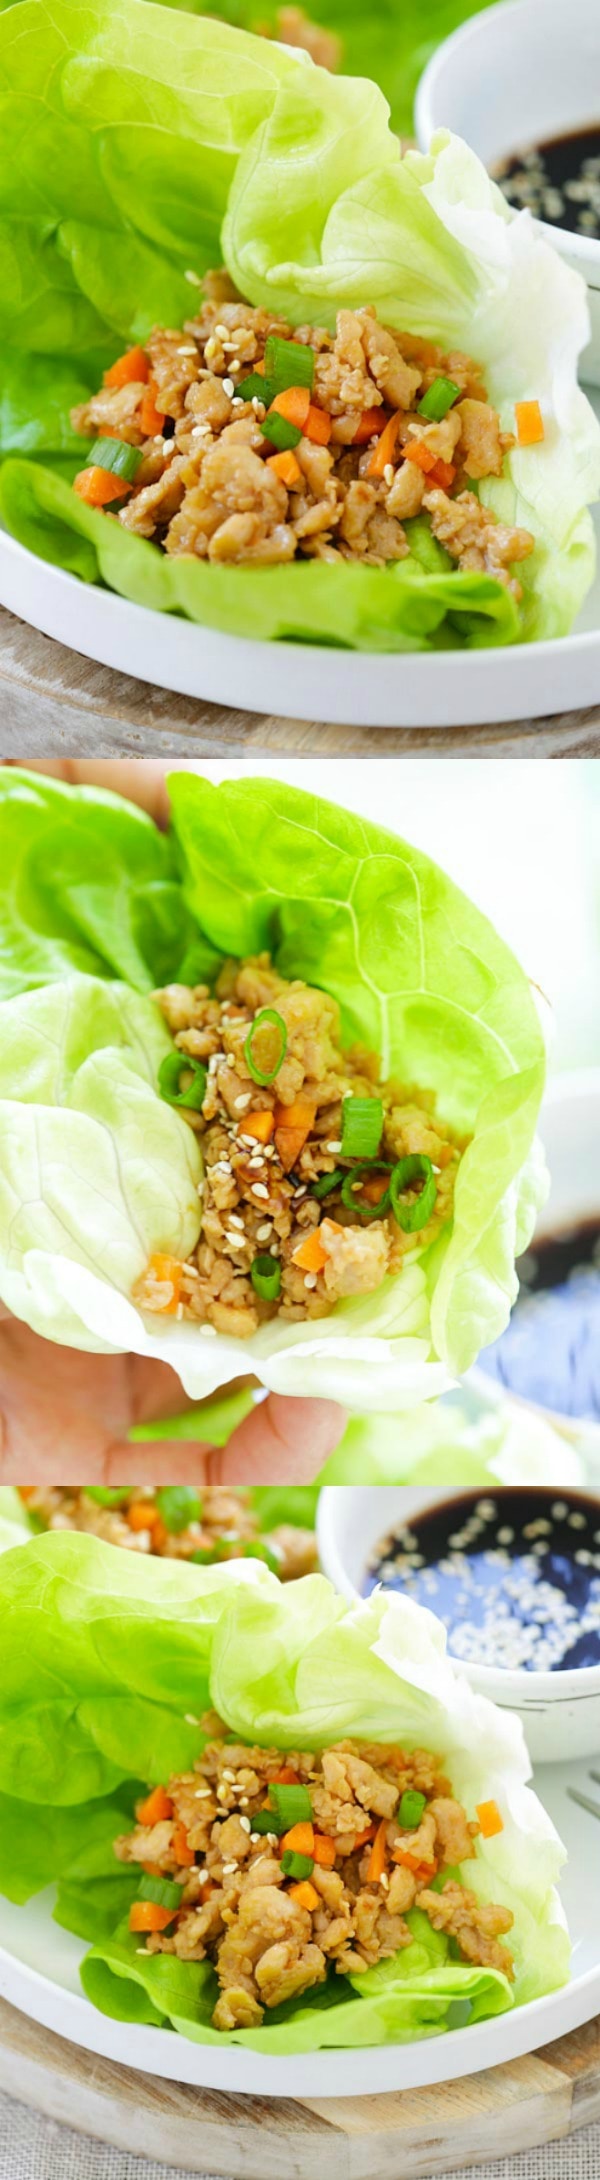 Chicken Lettuce Wraps - quick, easy and the best lettuce wraps recipe with juicy and moist ground chicken wrapped up with fresh and crisp lettuce leaves. Homemade is always better than P. F. Chang's or Chinese takeout | rasamalaysia.com